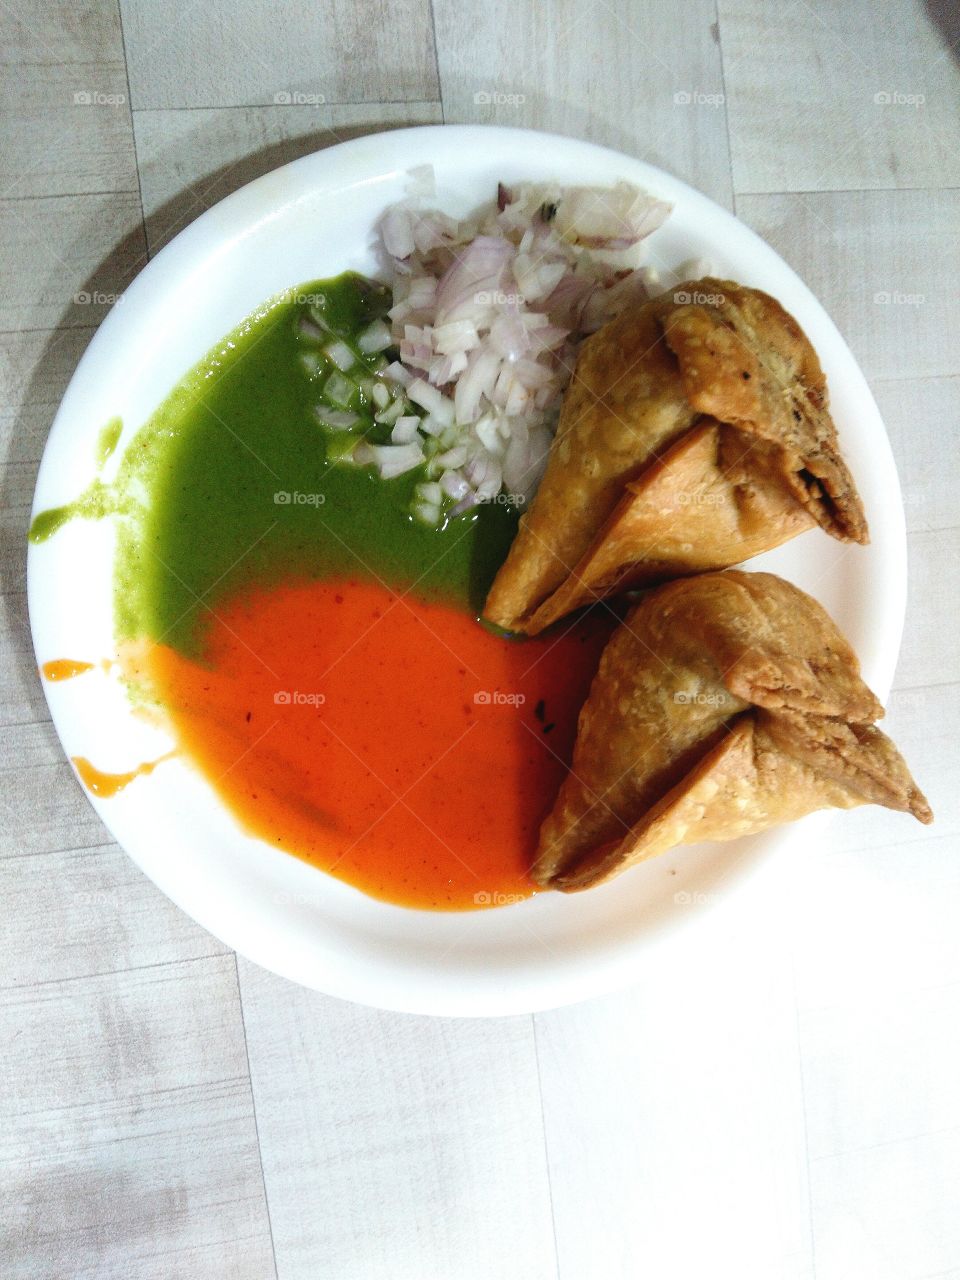 the all over india we get this ( samosa